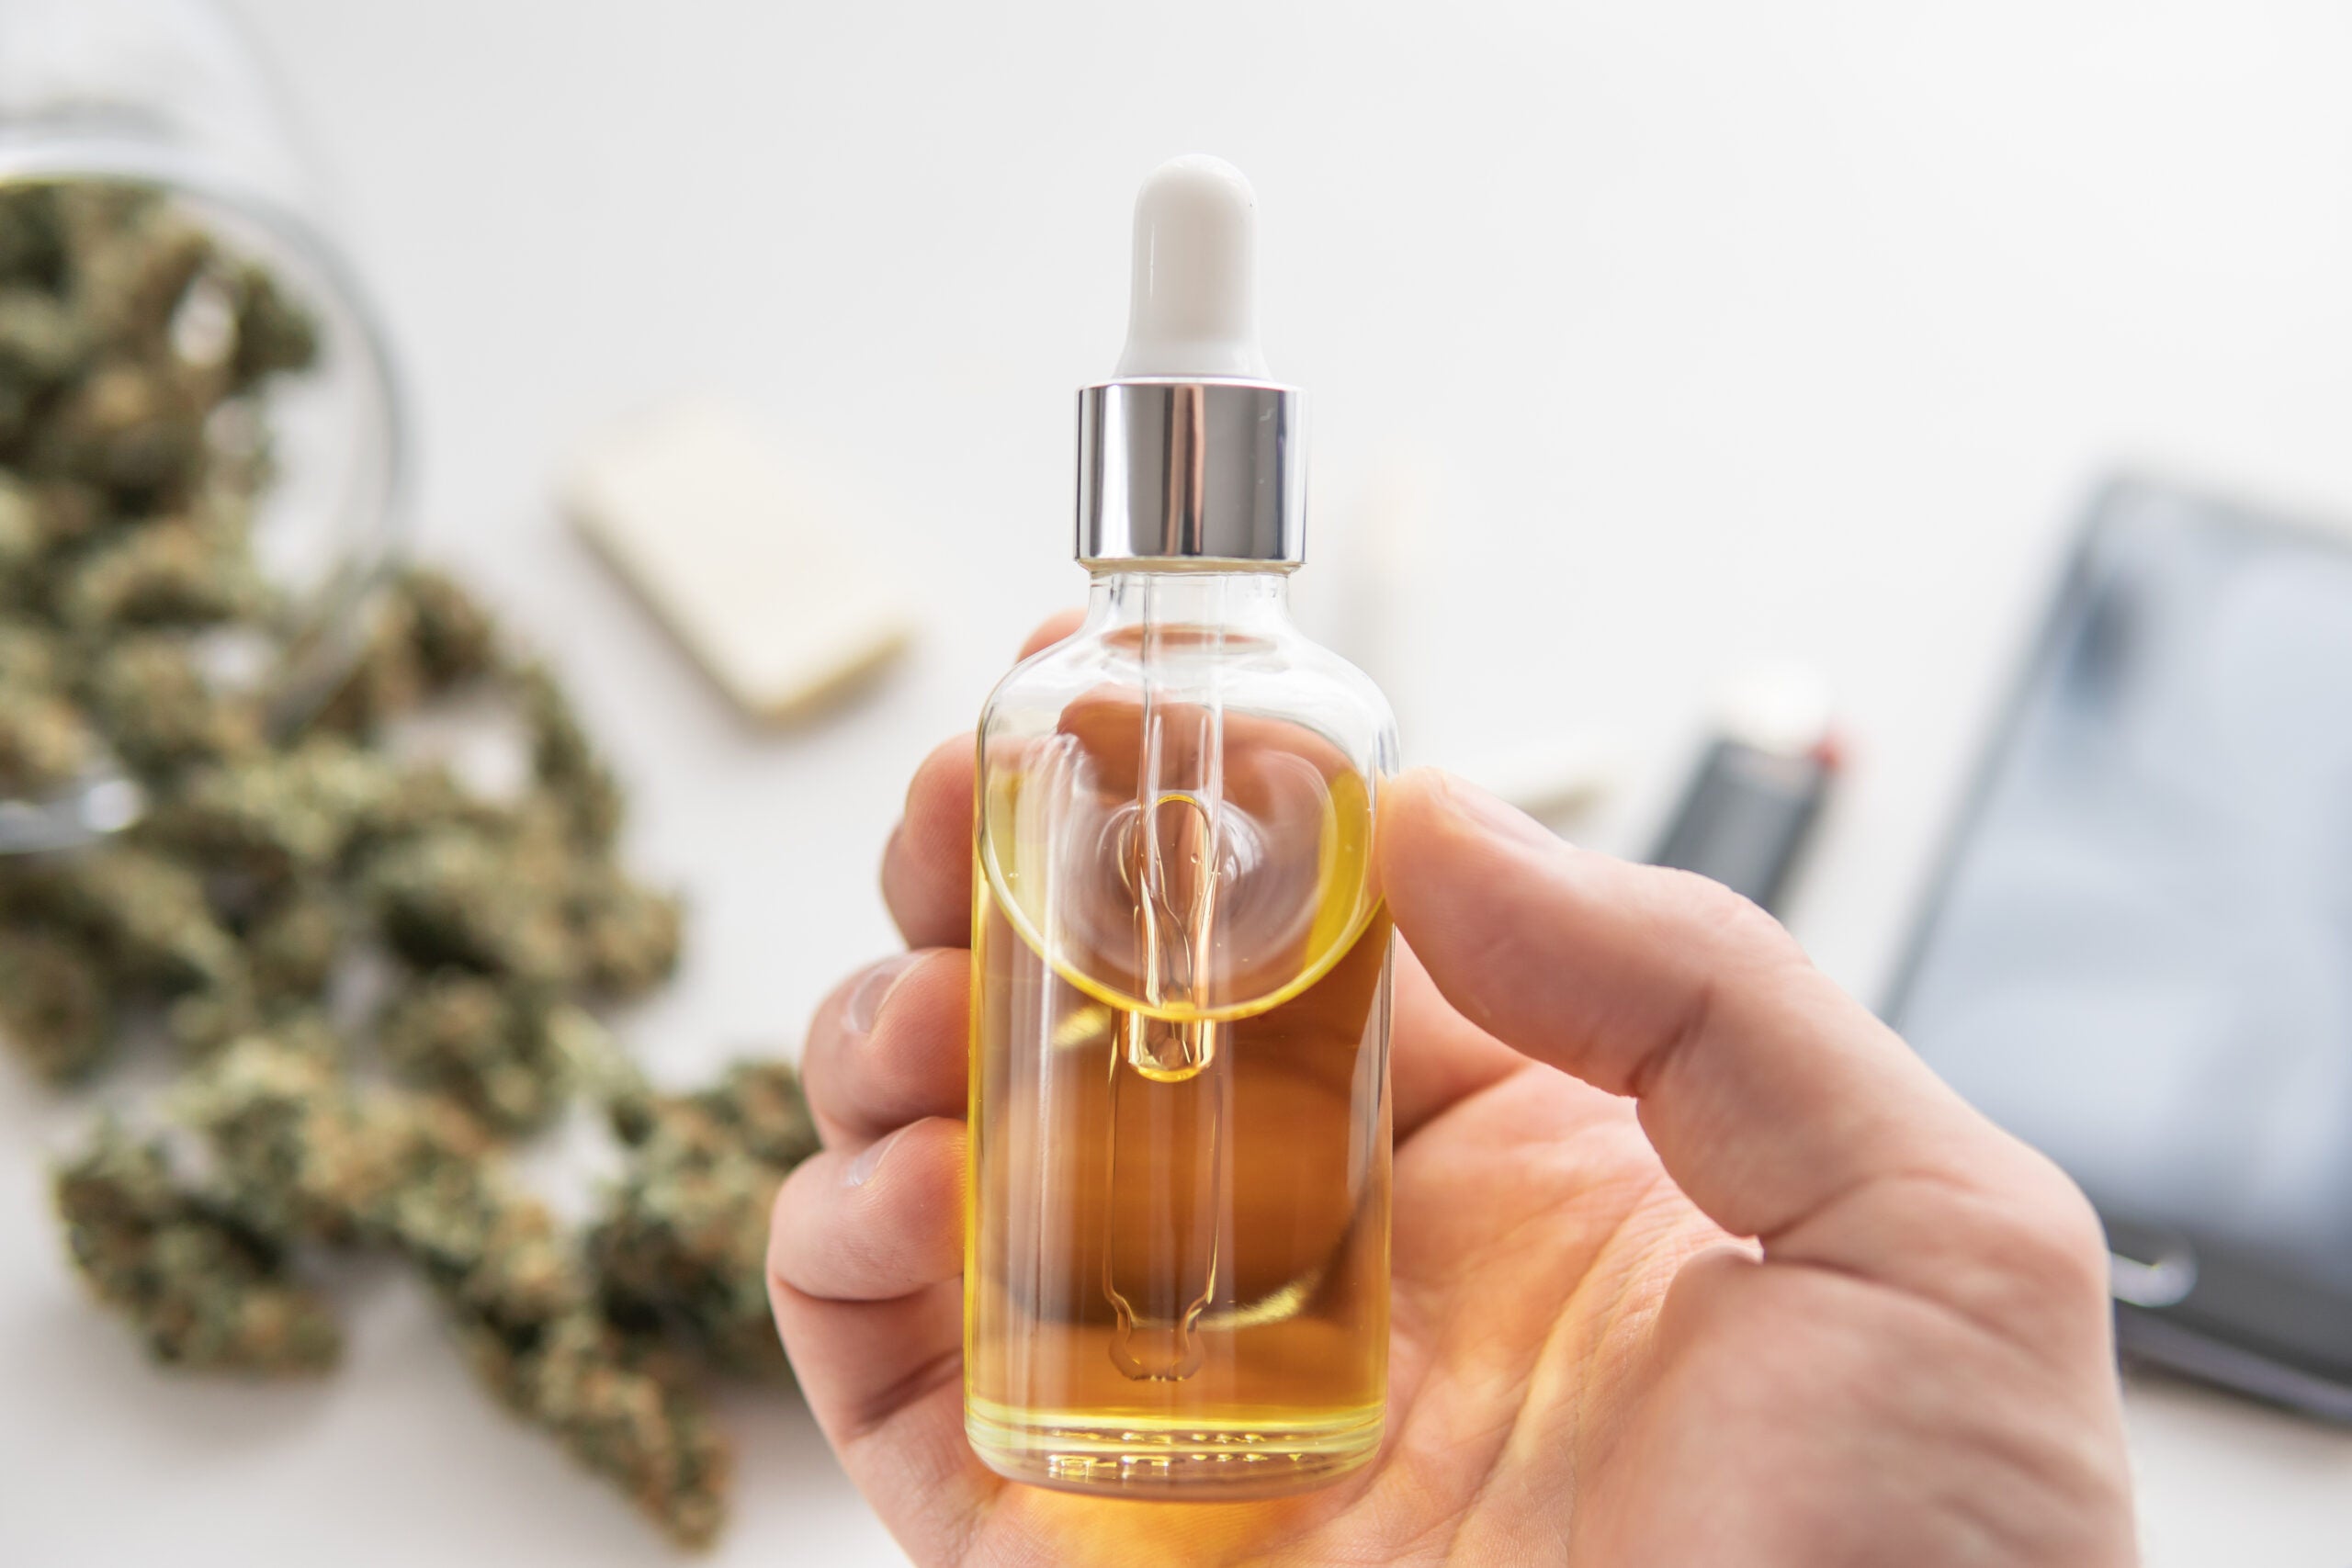 Valens &#038; Entourage To Create White-Label CBD Oil For Canadian Retailer Fire &#038; Flower